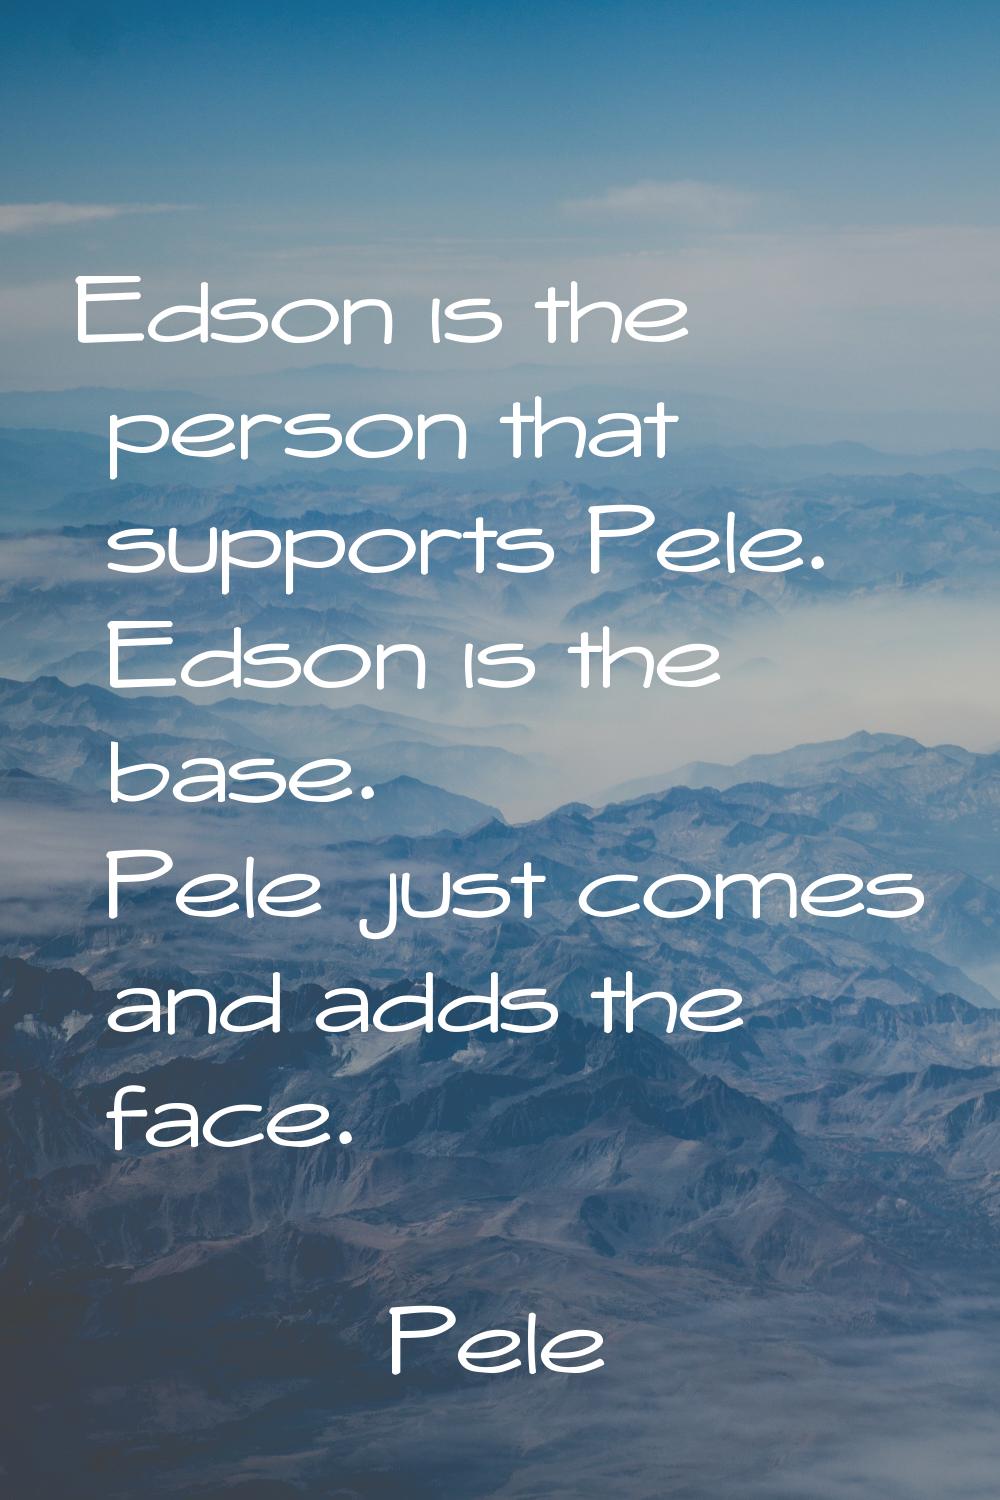 Edson is the person that supports Pele. Edson is the base. Pele just comes and adds the face.